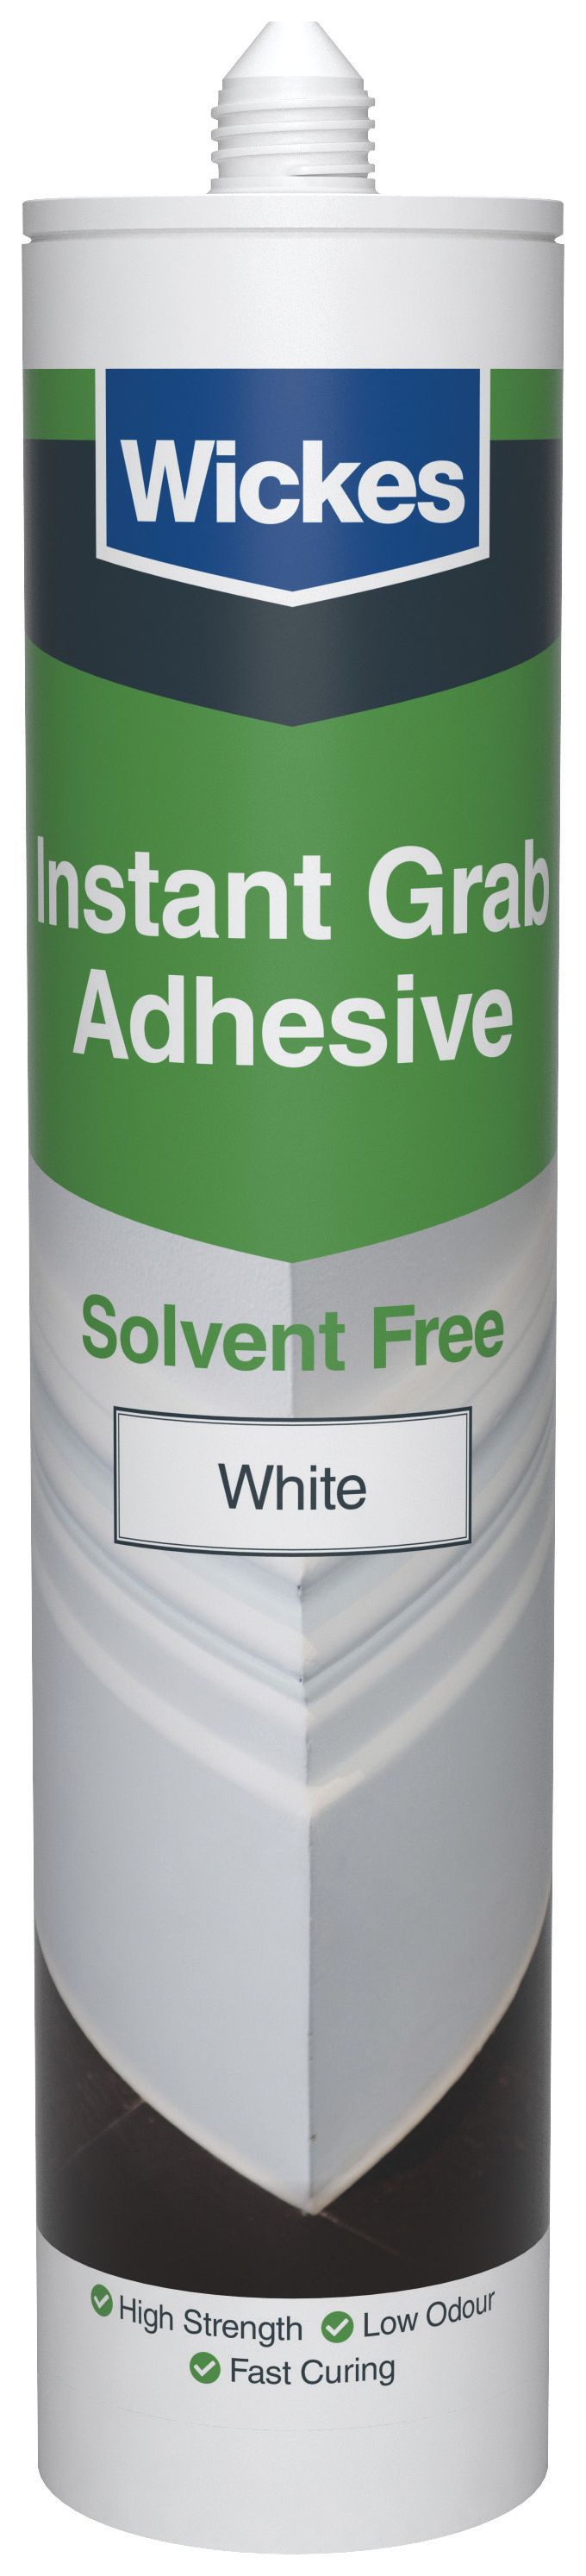 Image of Wickes Instant Grab Adhesive Solvent Free - 300ml